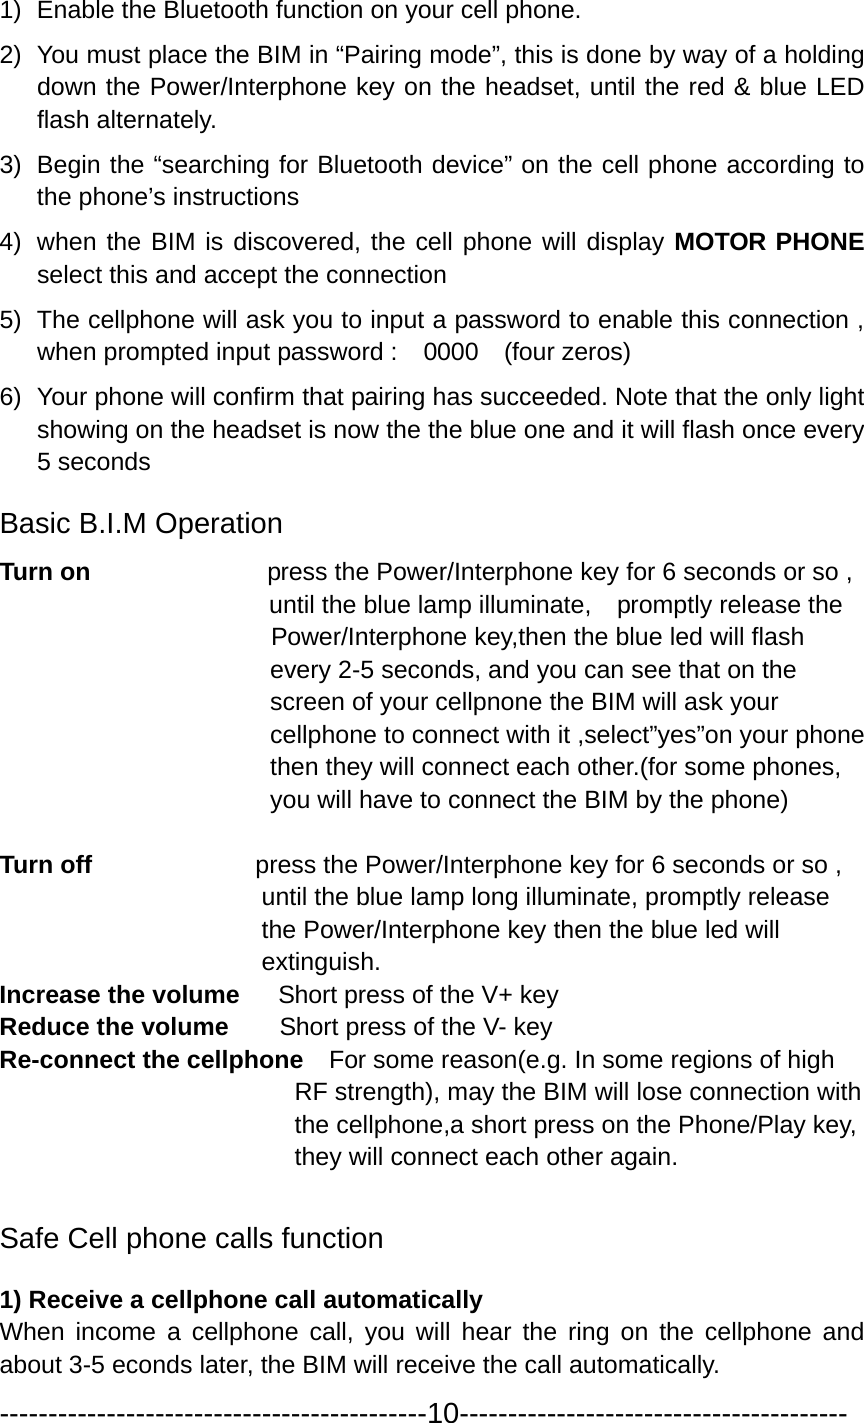 1)  Enable the Bluetooth function on your cell phone.                       2)  You must place the BIM in “Pairing mode”, this is done by way of a holding down the Power/Interphone key on the headset, until the red &amp; blue LED flash alternately.   3)  Begin the “searching for Bluetooth device” on the cell phone according to the phone’s instructions 4)  when the BIM is discovered, the cell phone will display MOTOR PHONE select this and accept the connection     5)  The cellphone will ask you to input a password to enable this connection , when prompted input password :    0000    (four zeros) 6)  Your phone will confirm that pairing has succeeded. Note that the only light showing on the headset is now the the blue one and it will flash once every 5 seconds Basic B.I.M Operation   Turn on              press the Power/Interphone key for 6 seconds or so ,   until the blue lamp illuminate,    promptly release the         Power/Interphone key,then the blue led will flash   every 2-5 seconds, and you can see that on the   screen of your cellpnone the BIM will ask your   cellphone to connect with it ,select”yes”on your phone   then they will connect each other.(for some phones, you will have to connect the BIM by the phone)  Turn off             press the Power/Interphone key for 6 seconds or so ,   until the blue lamp long illuminate, promptly release the Power/Interphone key then the blue led will     extinguish. Increase the volume      Short press of the V+ key Reduce the volume        Short press of the V- key Re-connect the cellphone    For some reason(e.g. In some regions of high RF strength), may the BIM will lose connection with the cellphone,a short press on the Phone/Play key, they will connect each other again.  Safe Cell phone calls function 1) Receive a cellphone call automatically When income a cellphone call, you will hear the ring on the cellphone and about 3-5 econds later, the BIM will receive the call automatically. --------------------------------------------10---------------------------------------- 